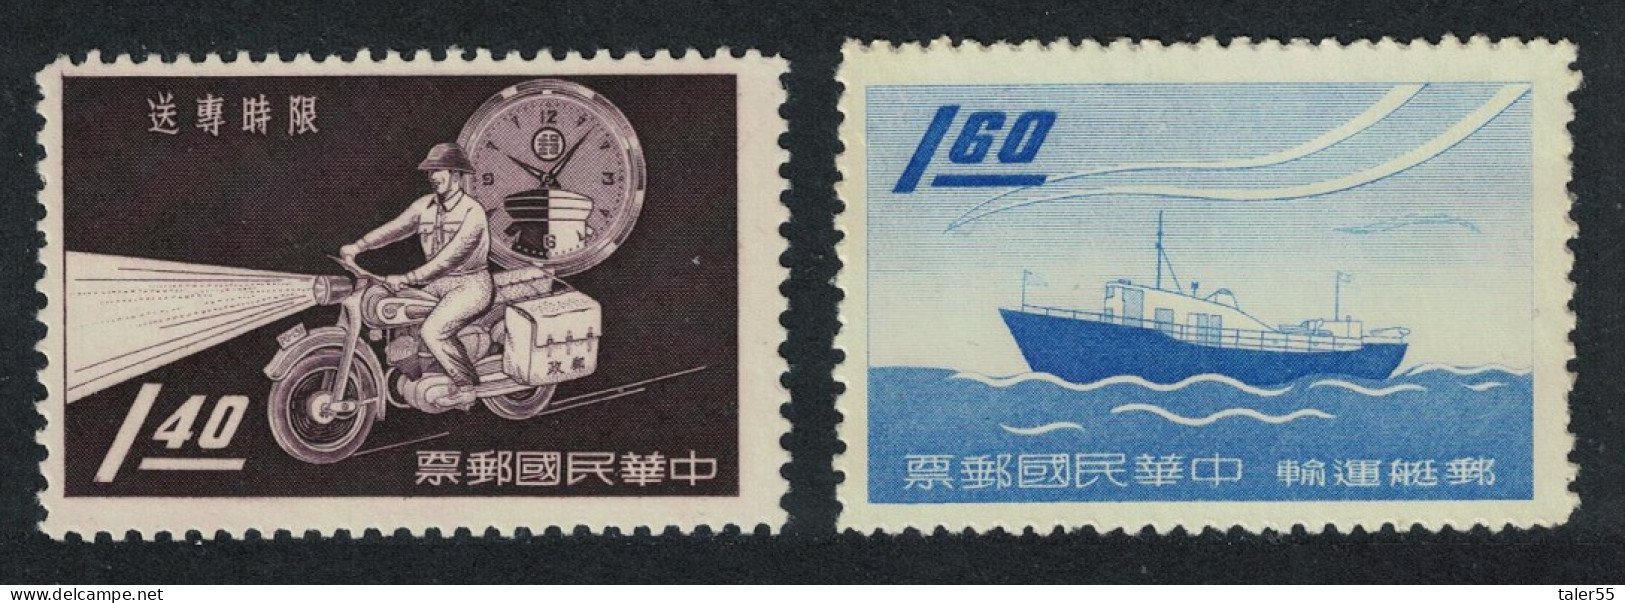 Taiwan Prompt Delivery Services 2v 1960 MNH SG#347-348 MI#355-356 - Ongebruikt